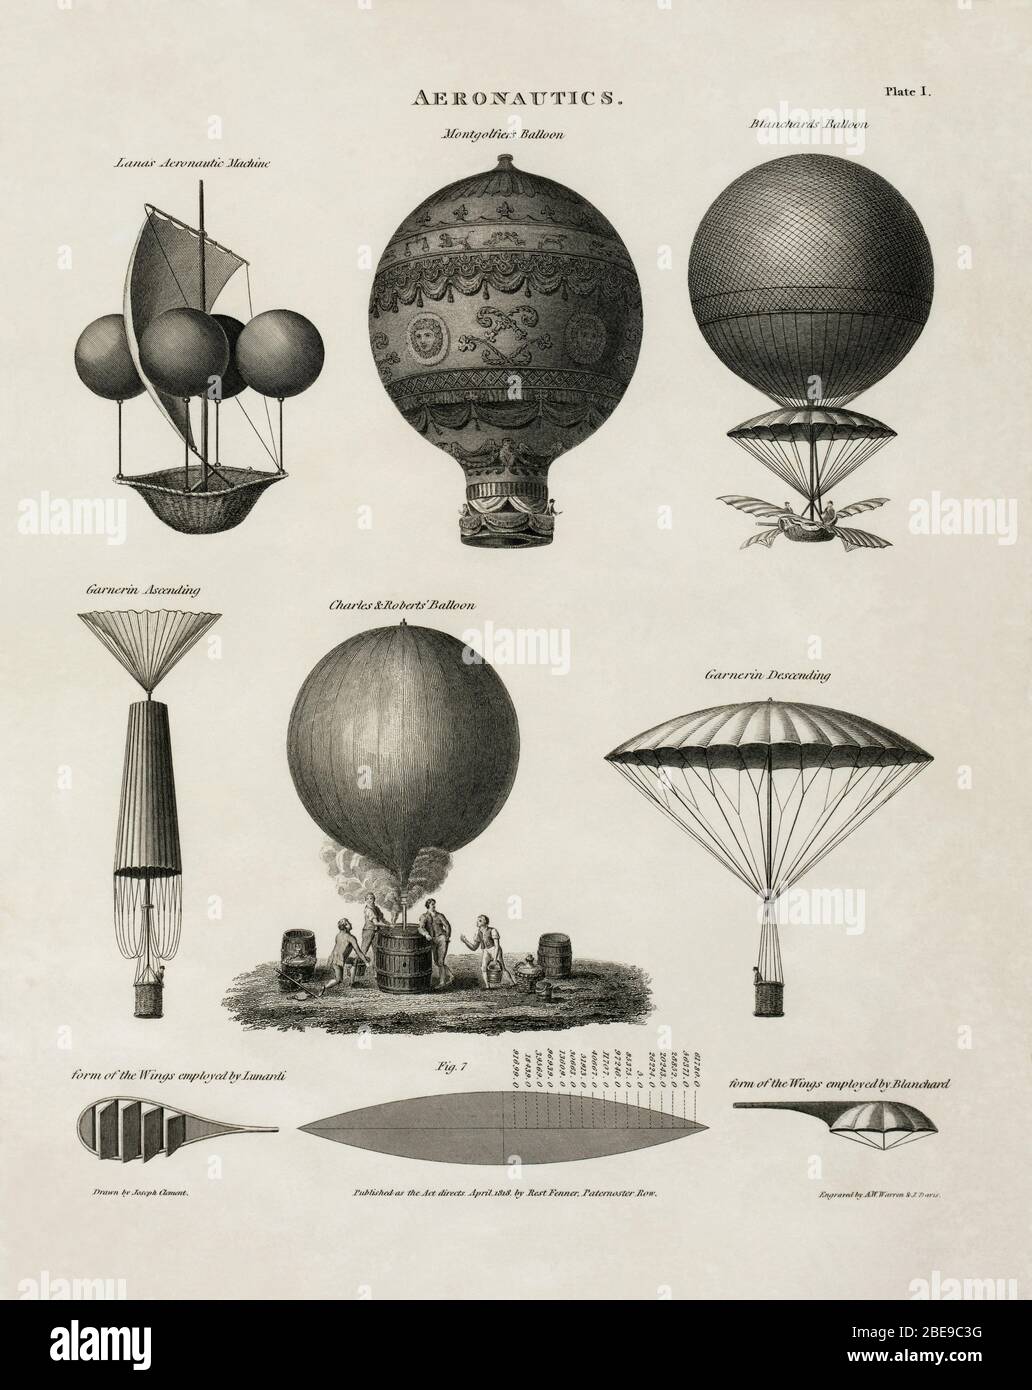 English: Technical illustration shows early balloon designs: Lana's  aeronautic machine, Montgolfiers' balloon, Blanchard's balloon, Garnerin  ascending [and] descending in his parachute, the Charles & Roberts' balloon  being inflated, the form of the